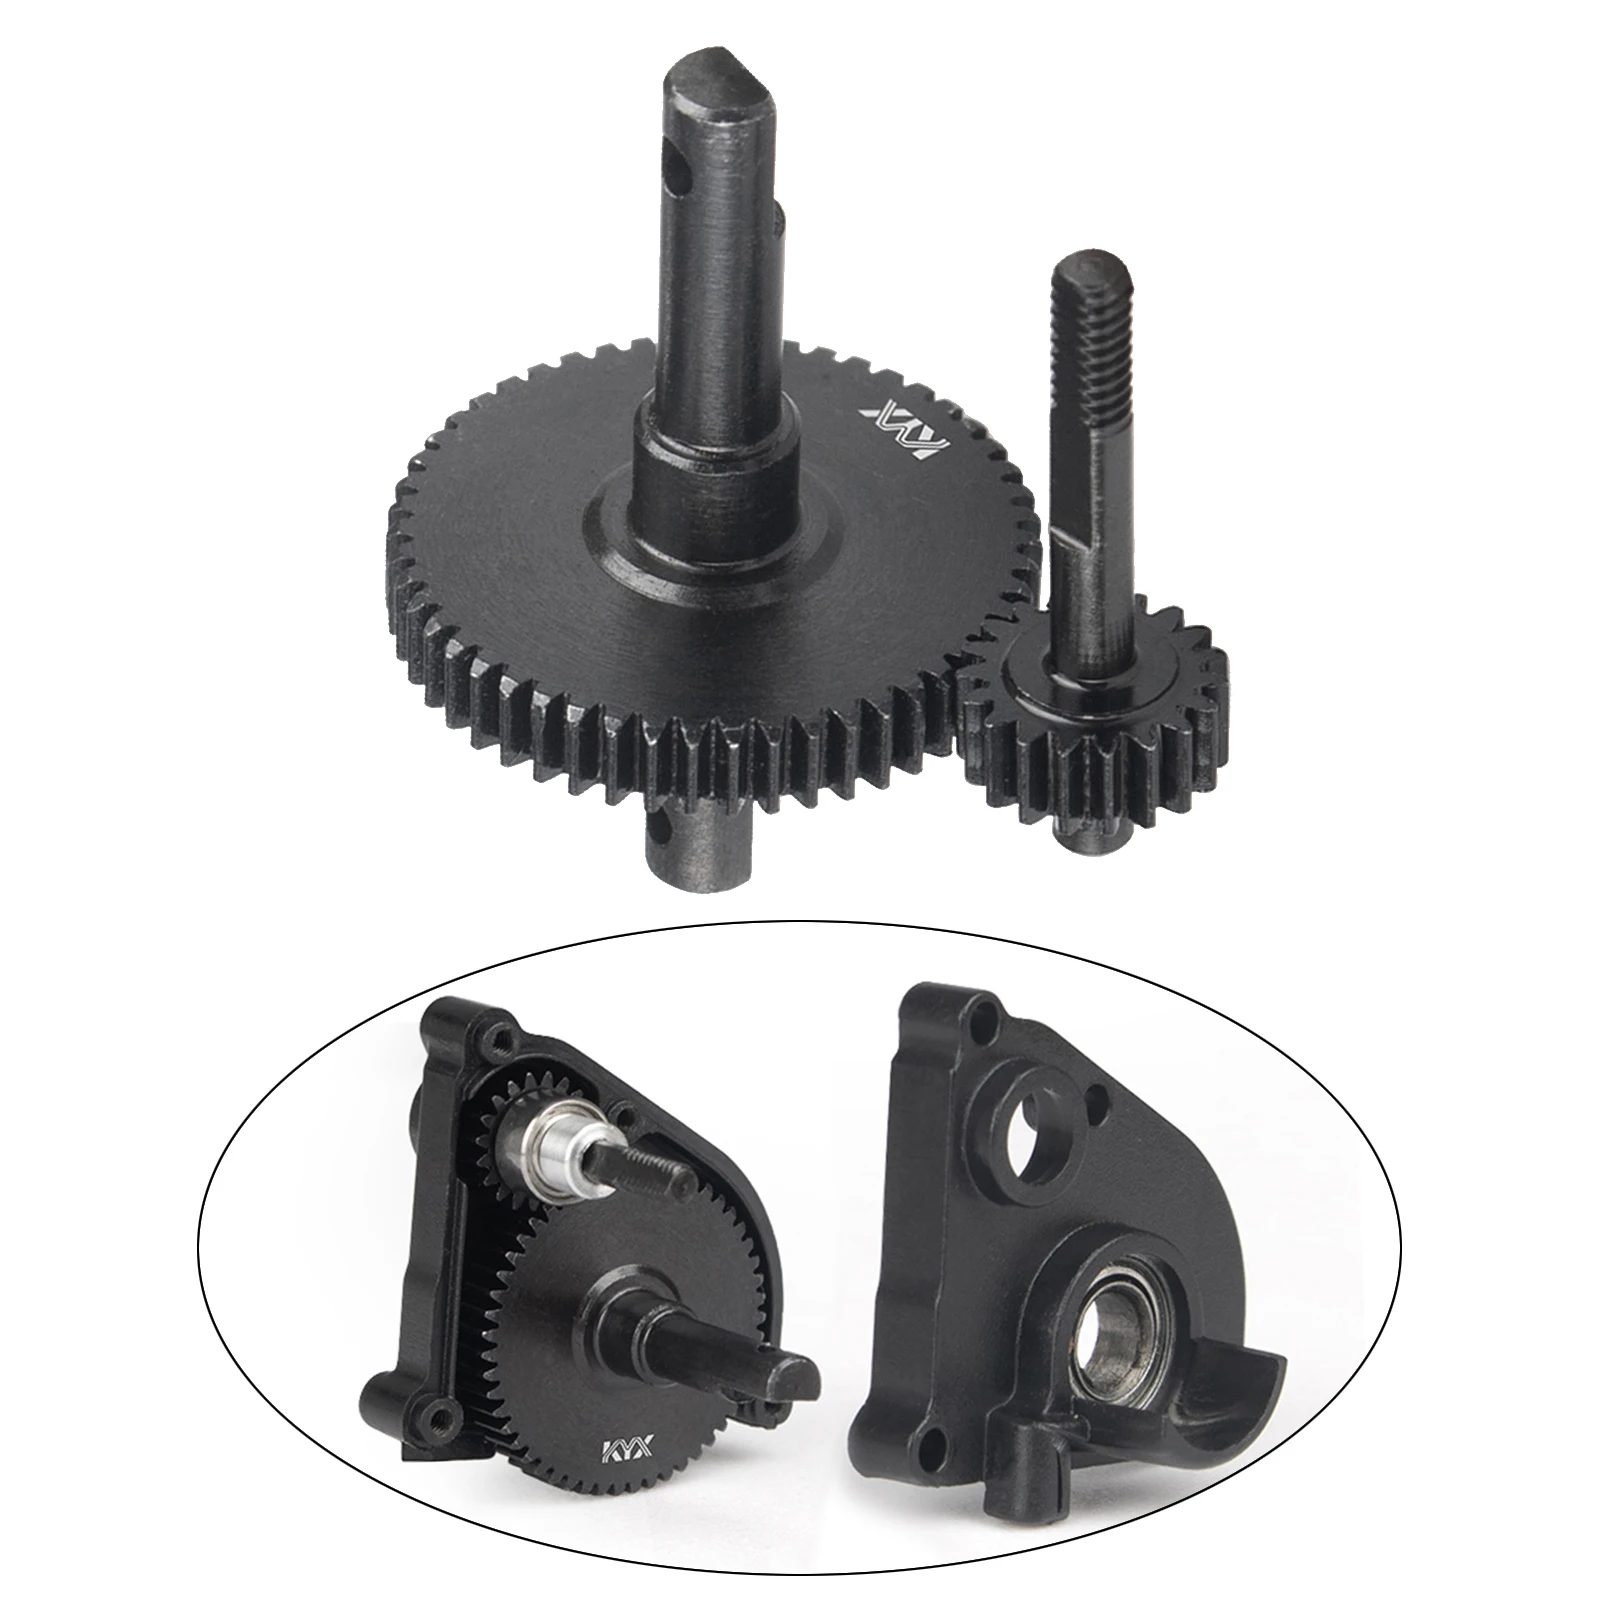 Strengthened 51T/19T Gearbox Gear Transmission for Axial SCX24 RC Crawler Car